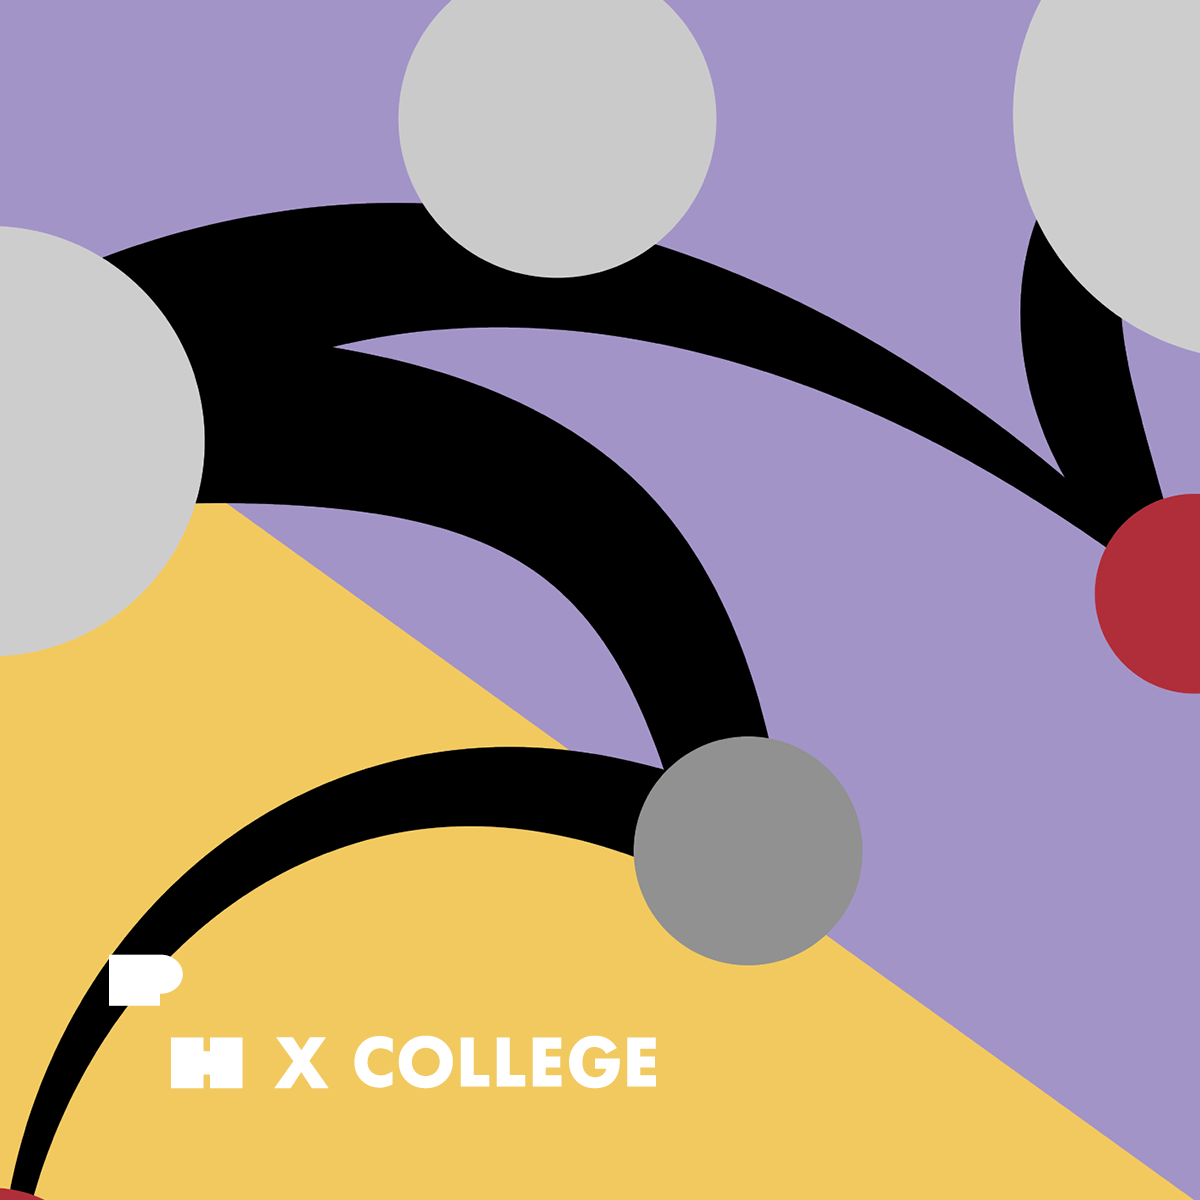 A graphic of gray, red, and white circles floating on black, gold, and purple varying shapes and surfaces. Text reads P H X College.